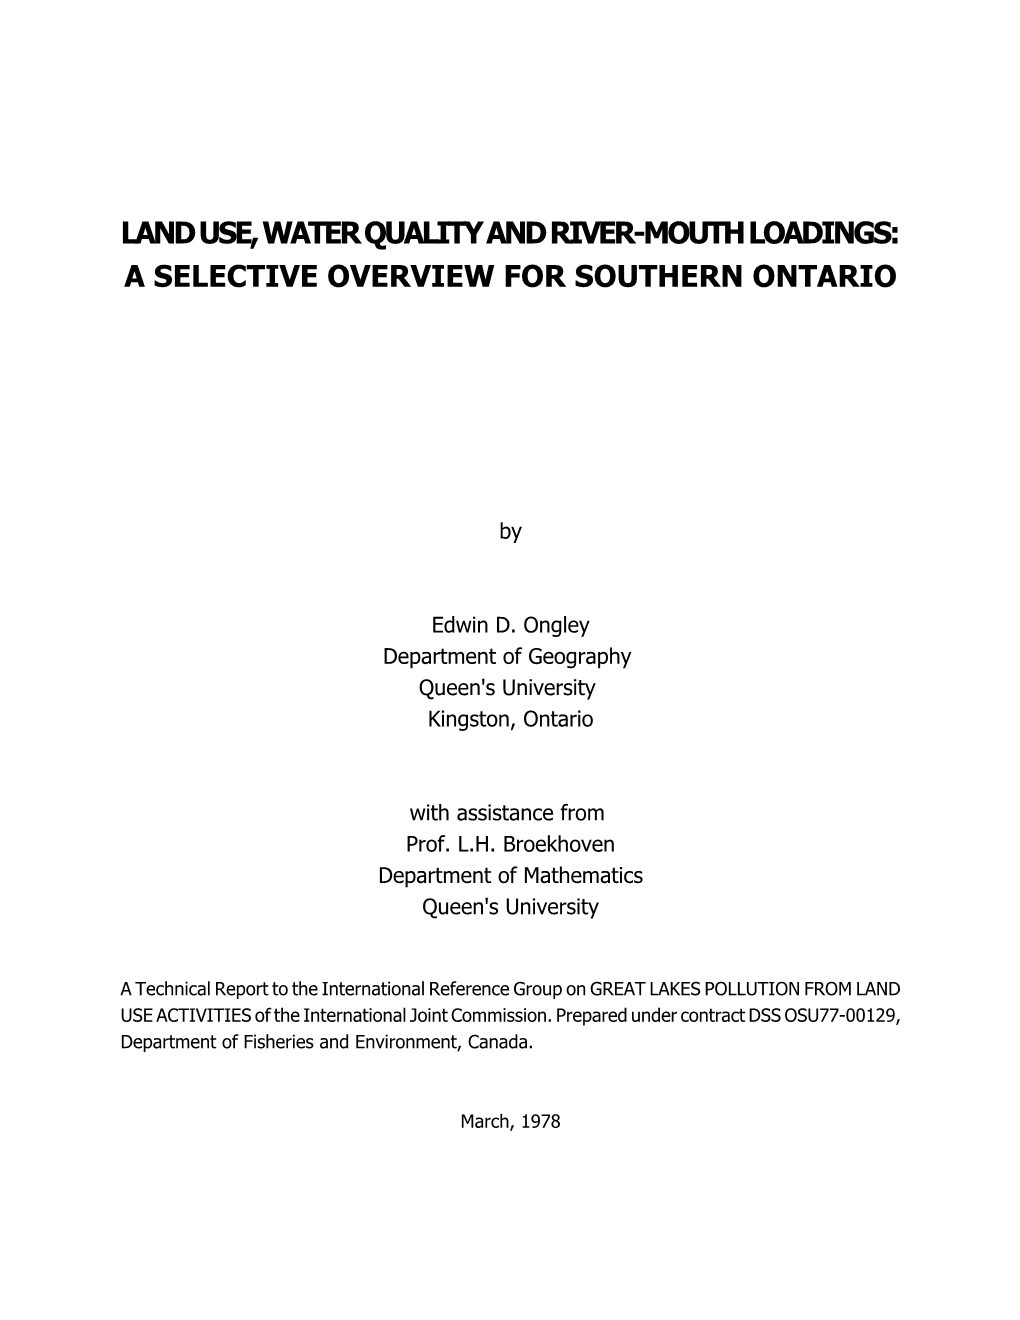 Land Use, Water Quality and River-Mouth Loadings: a Selective Overview for Southern Ontario